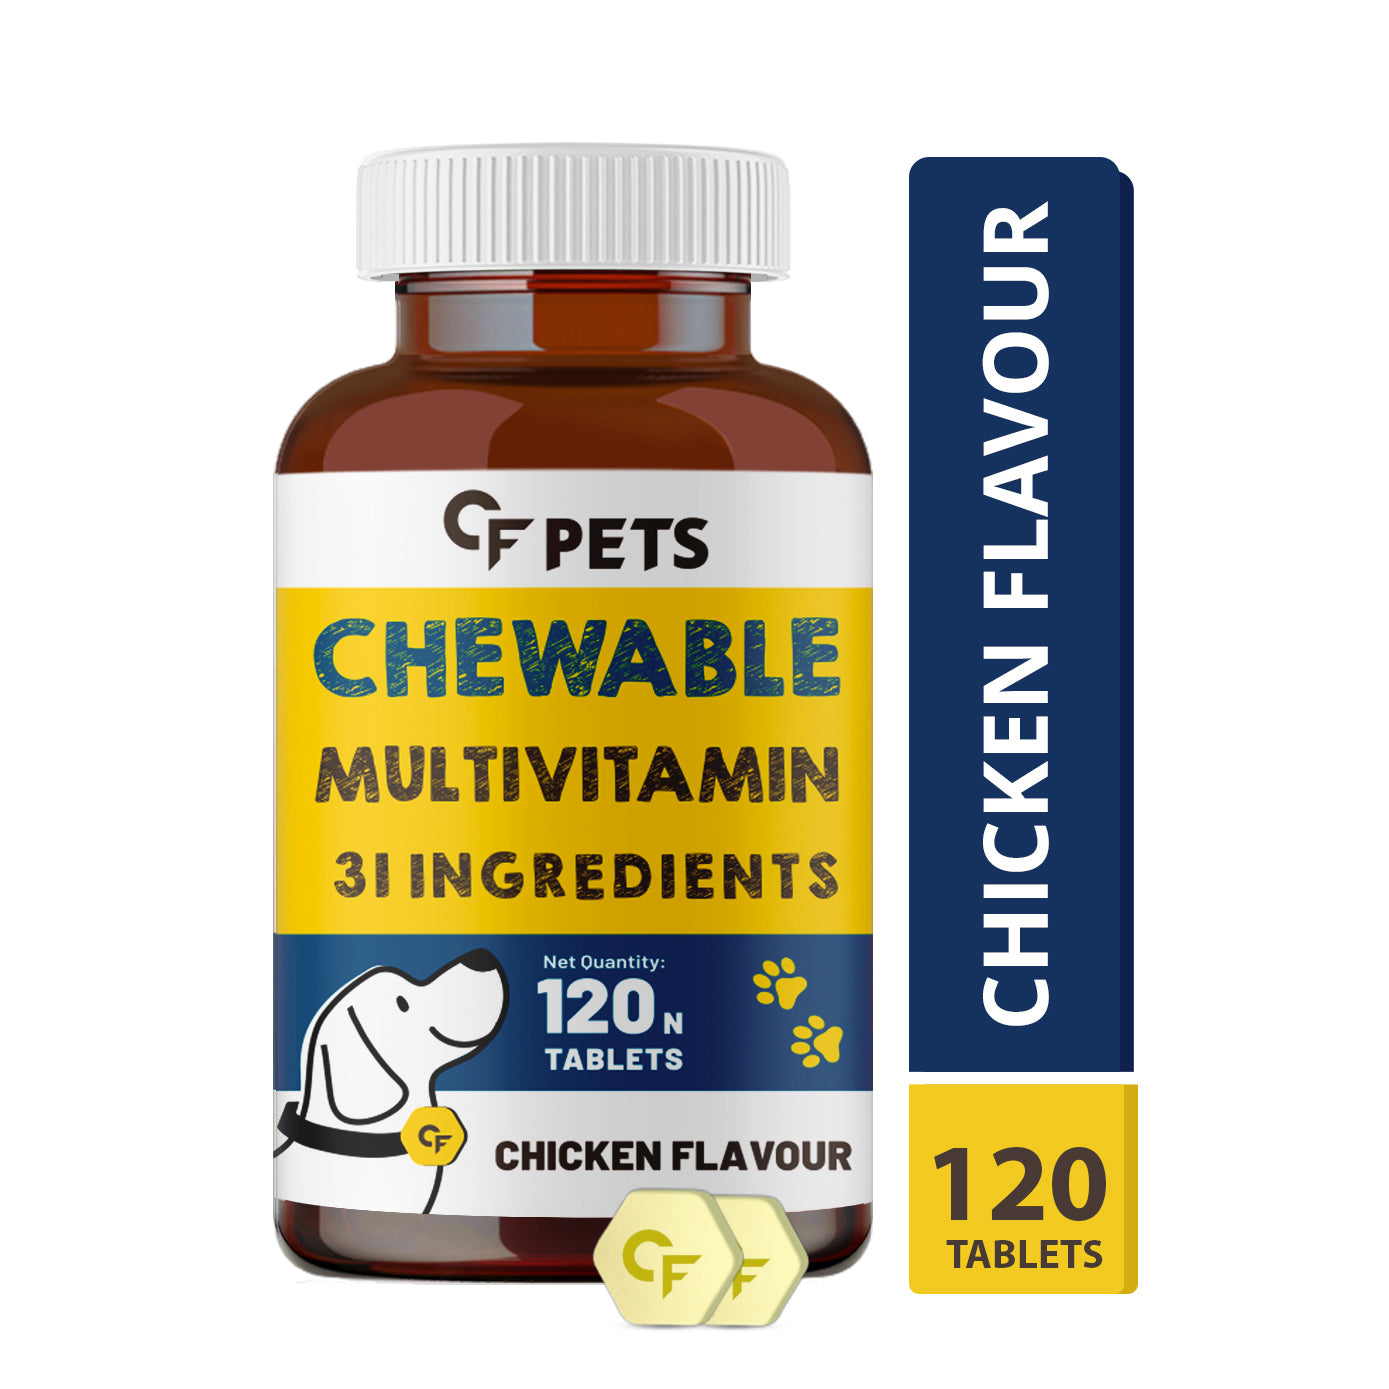 Mycf CF Pets Chewable Multivitamin Tablets for Dogs with 23 Essential Vitamins & Minerals for Healthy Skin, Heart, Brain, Digestive System & Joint Function | Chicken Flavour